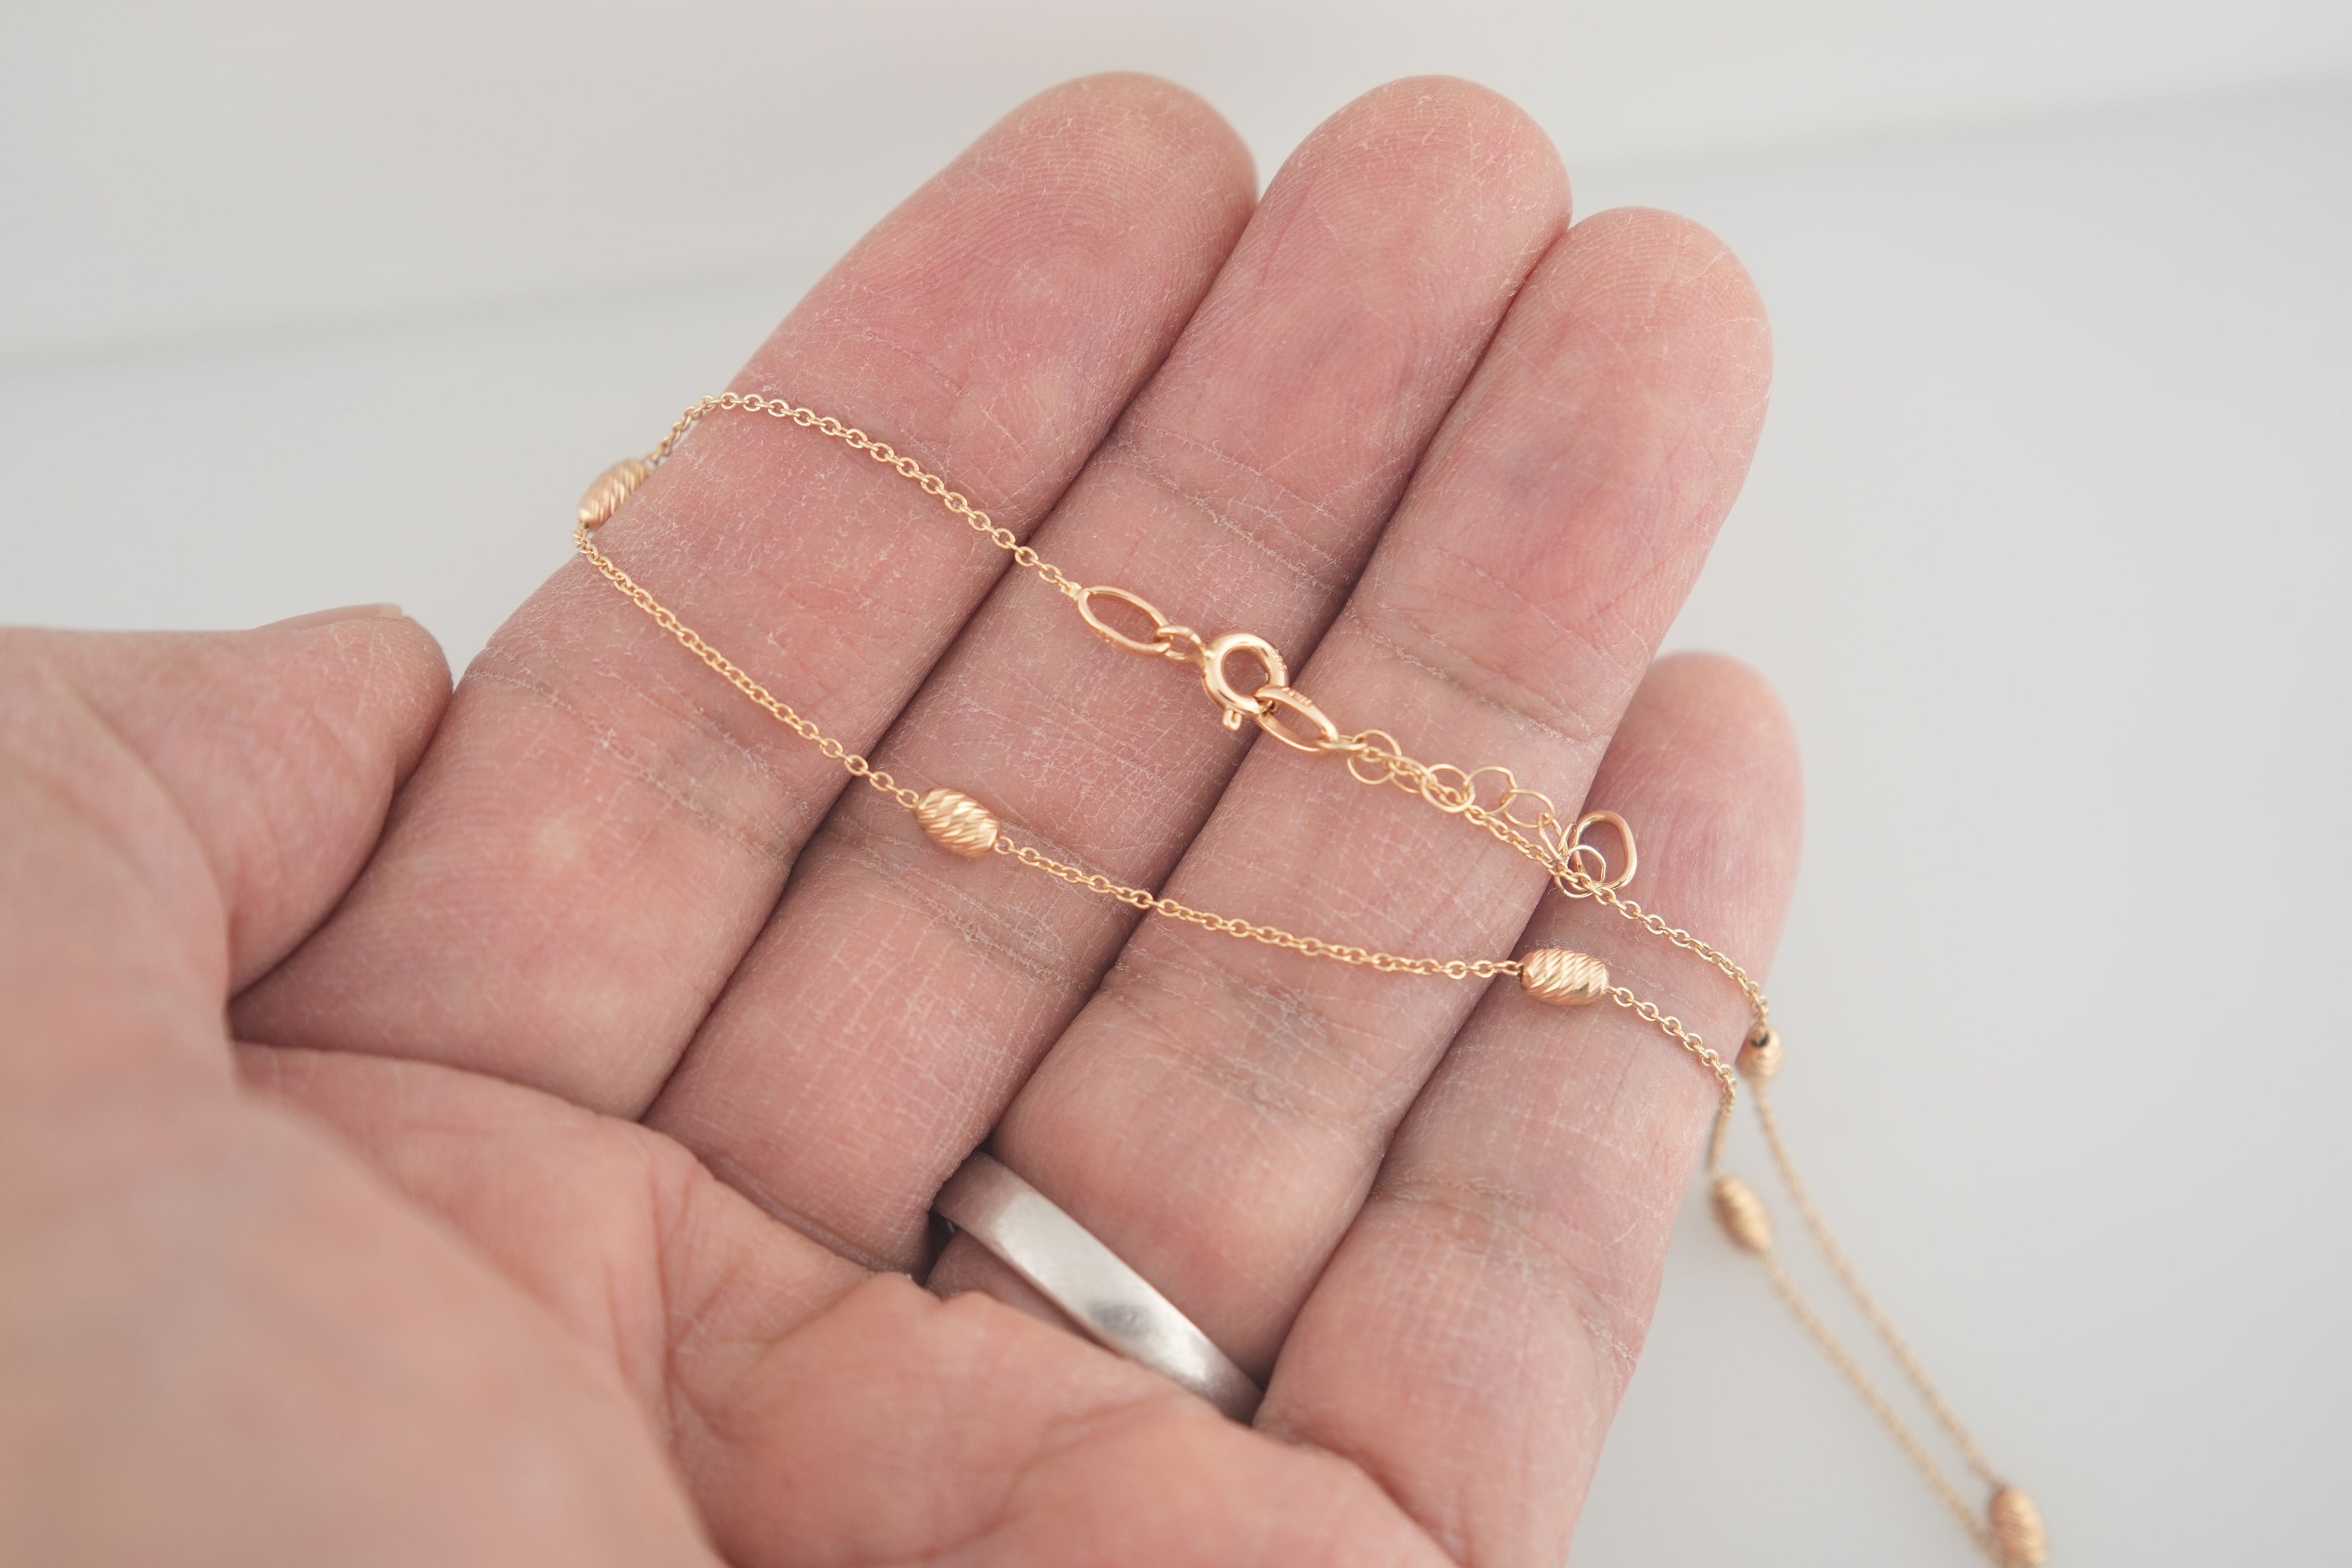 14k Yellow Gold Beaded Chain Anklet 10 Inches plus Extender